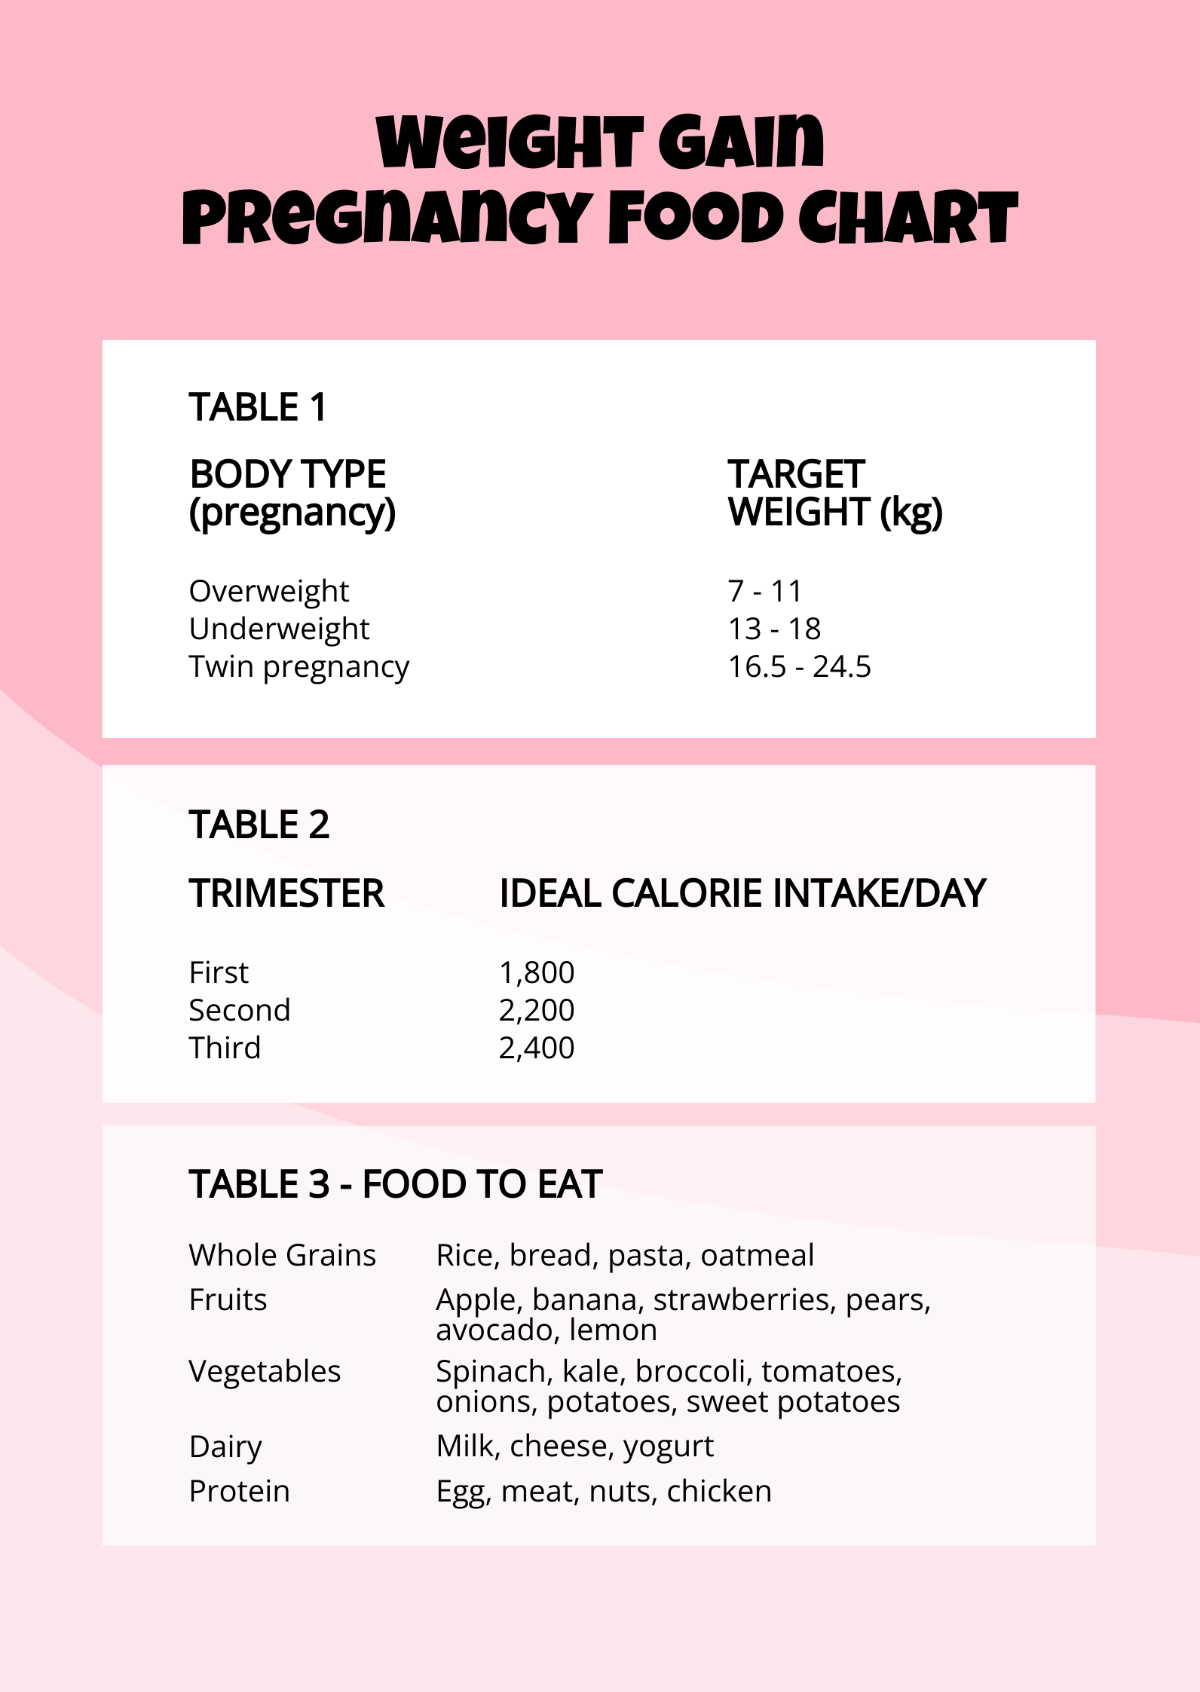 Weight Gain Pregnancy Food Chart Template